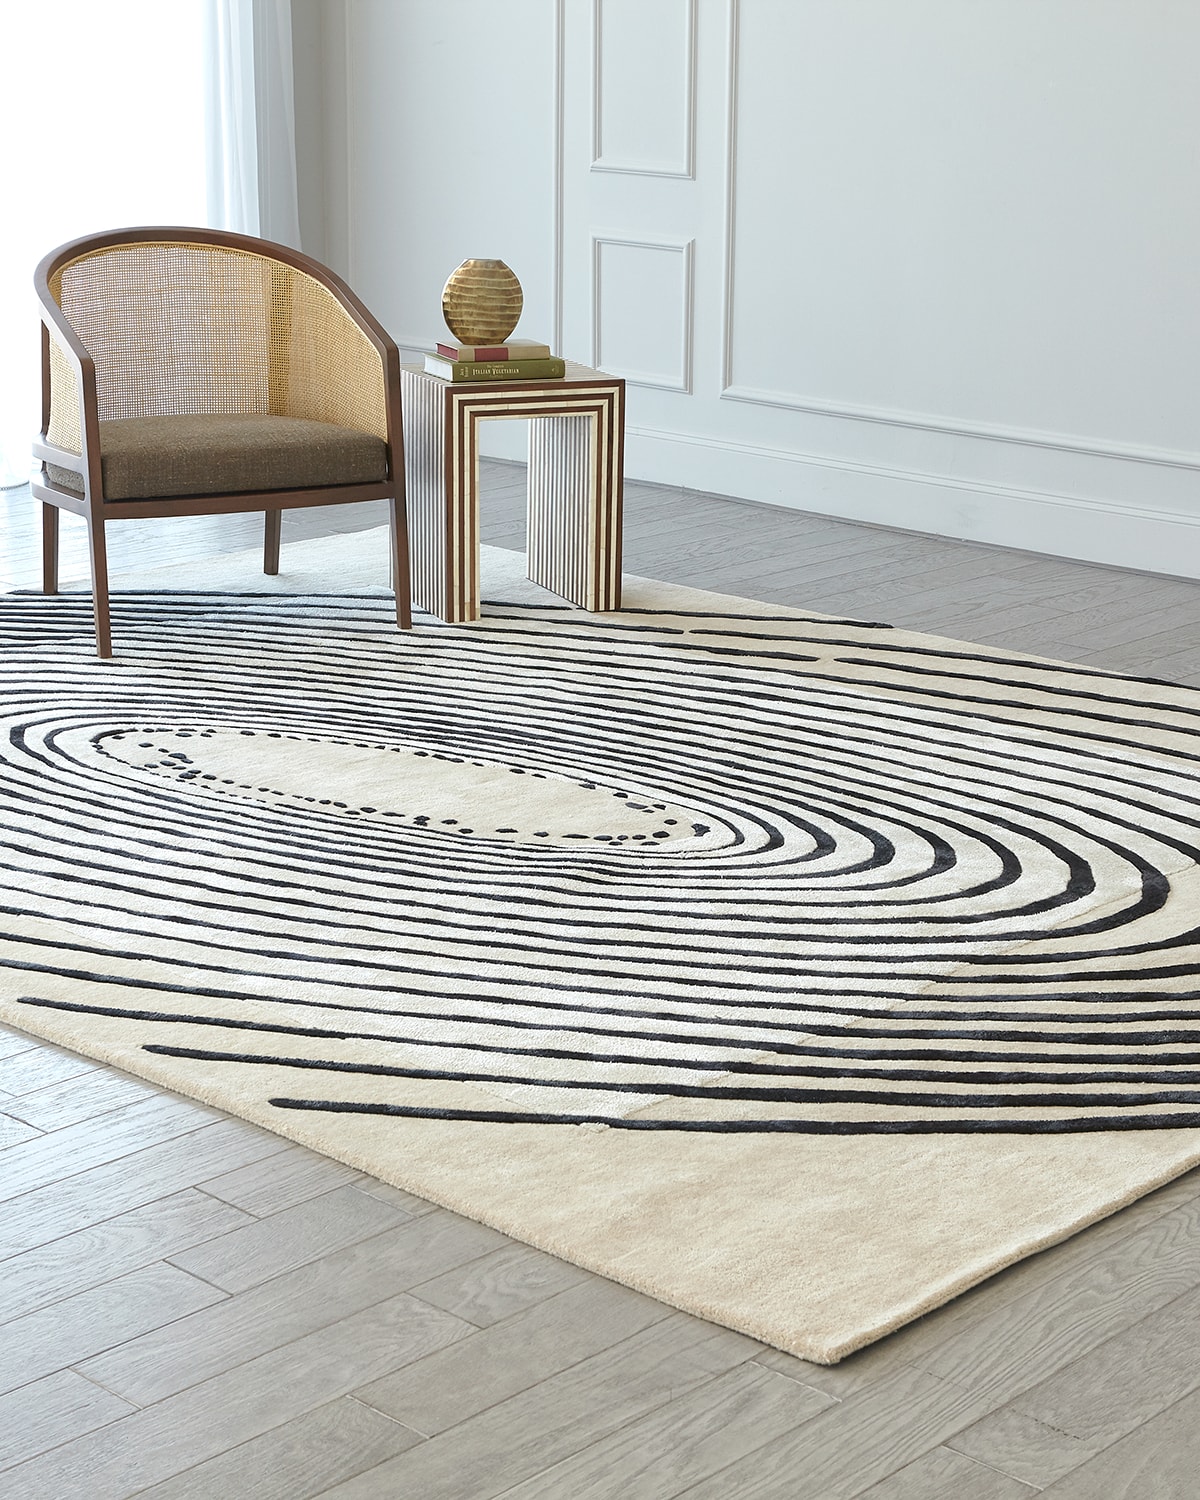 Concentric Circles Hand-Tufted Rug, 5' x 8'